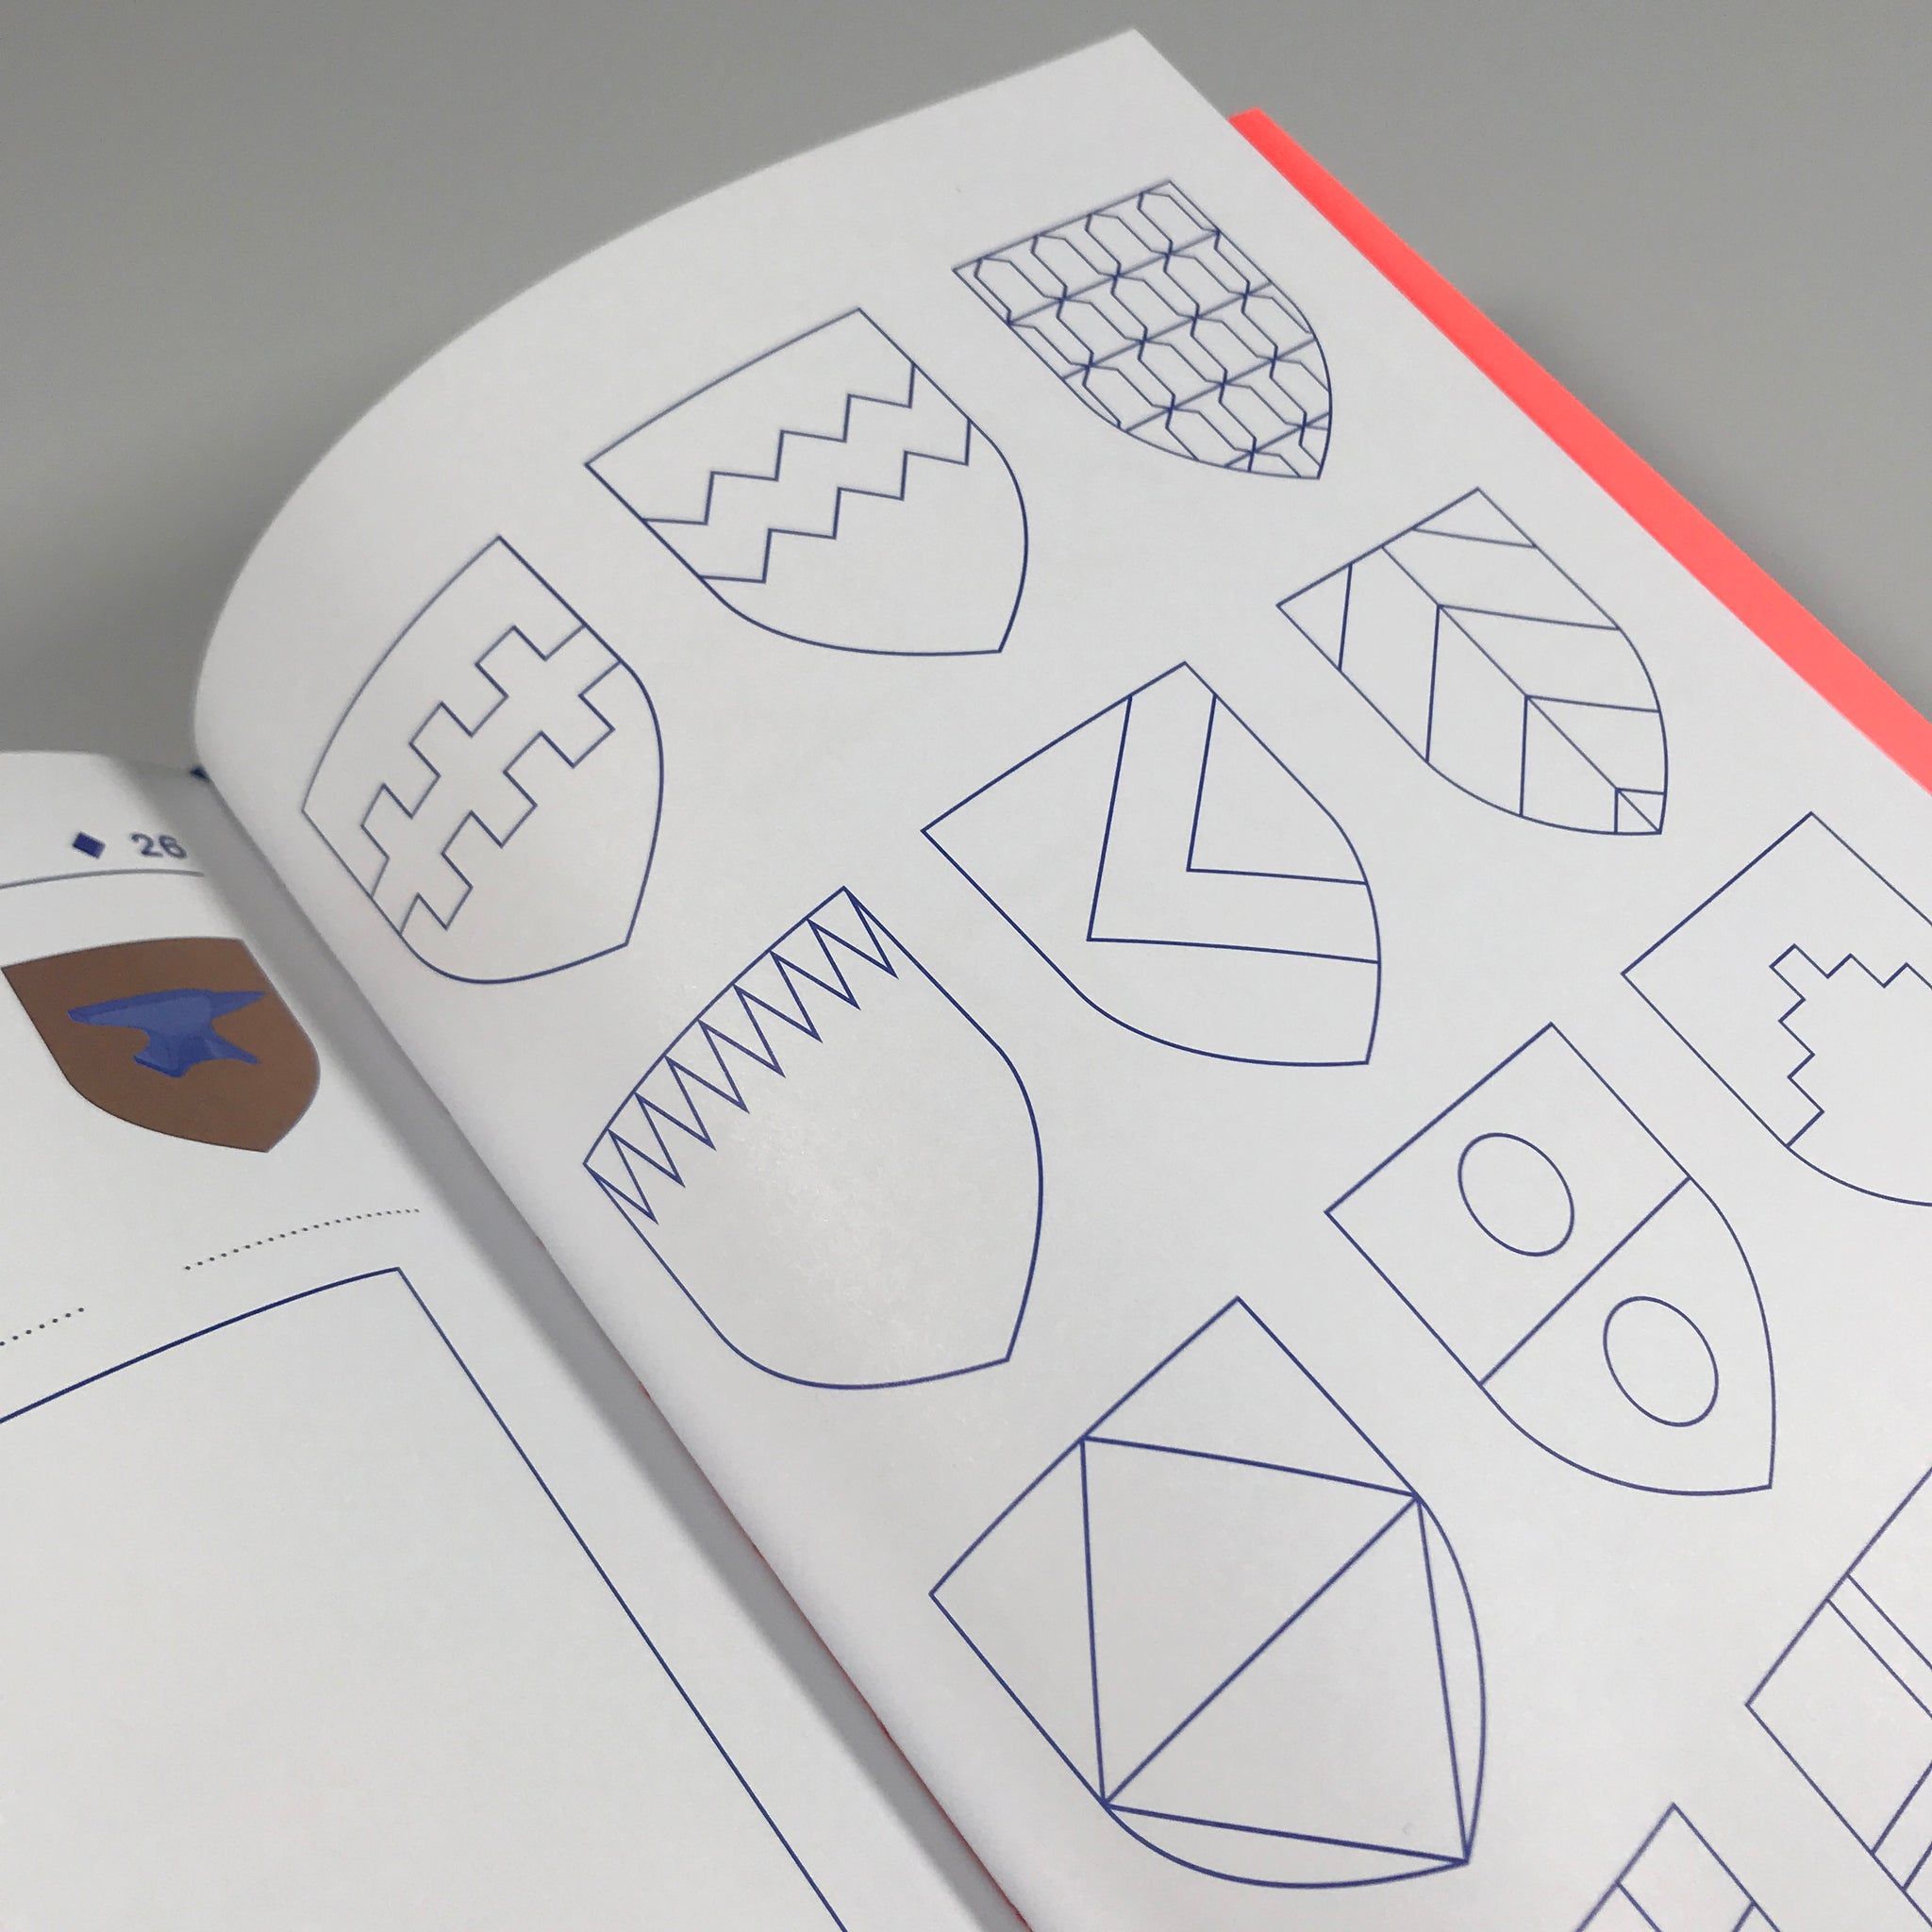 Graphic Design Play Book: An Exploration of Visual Thinking